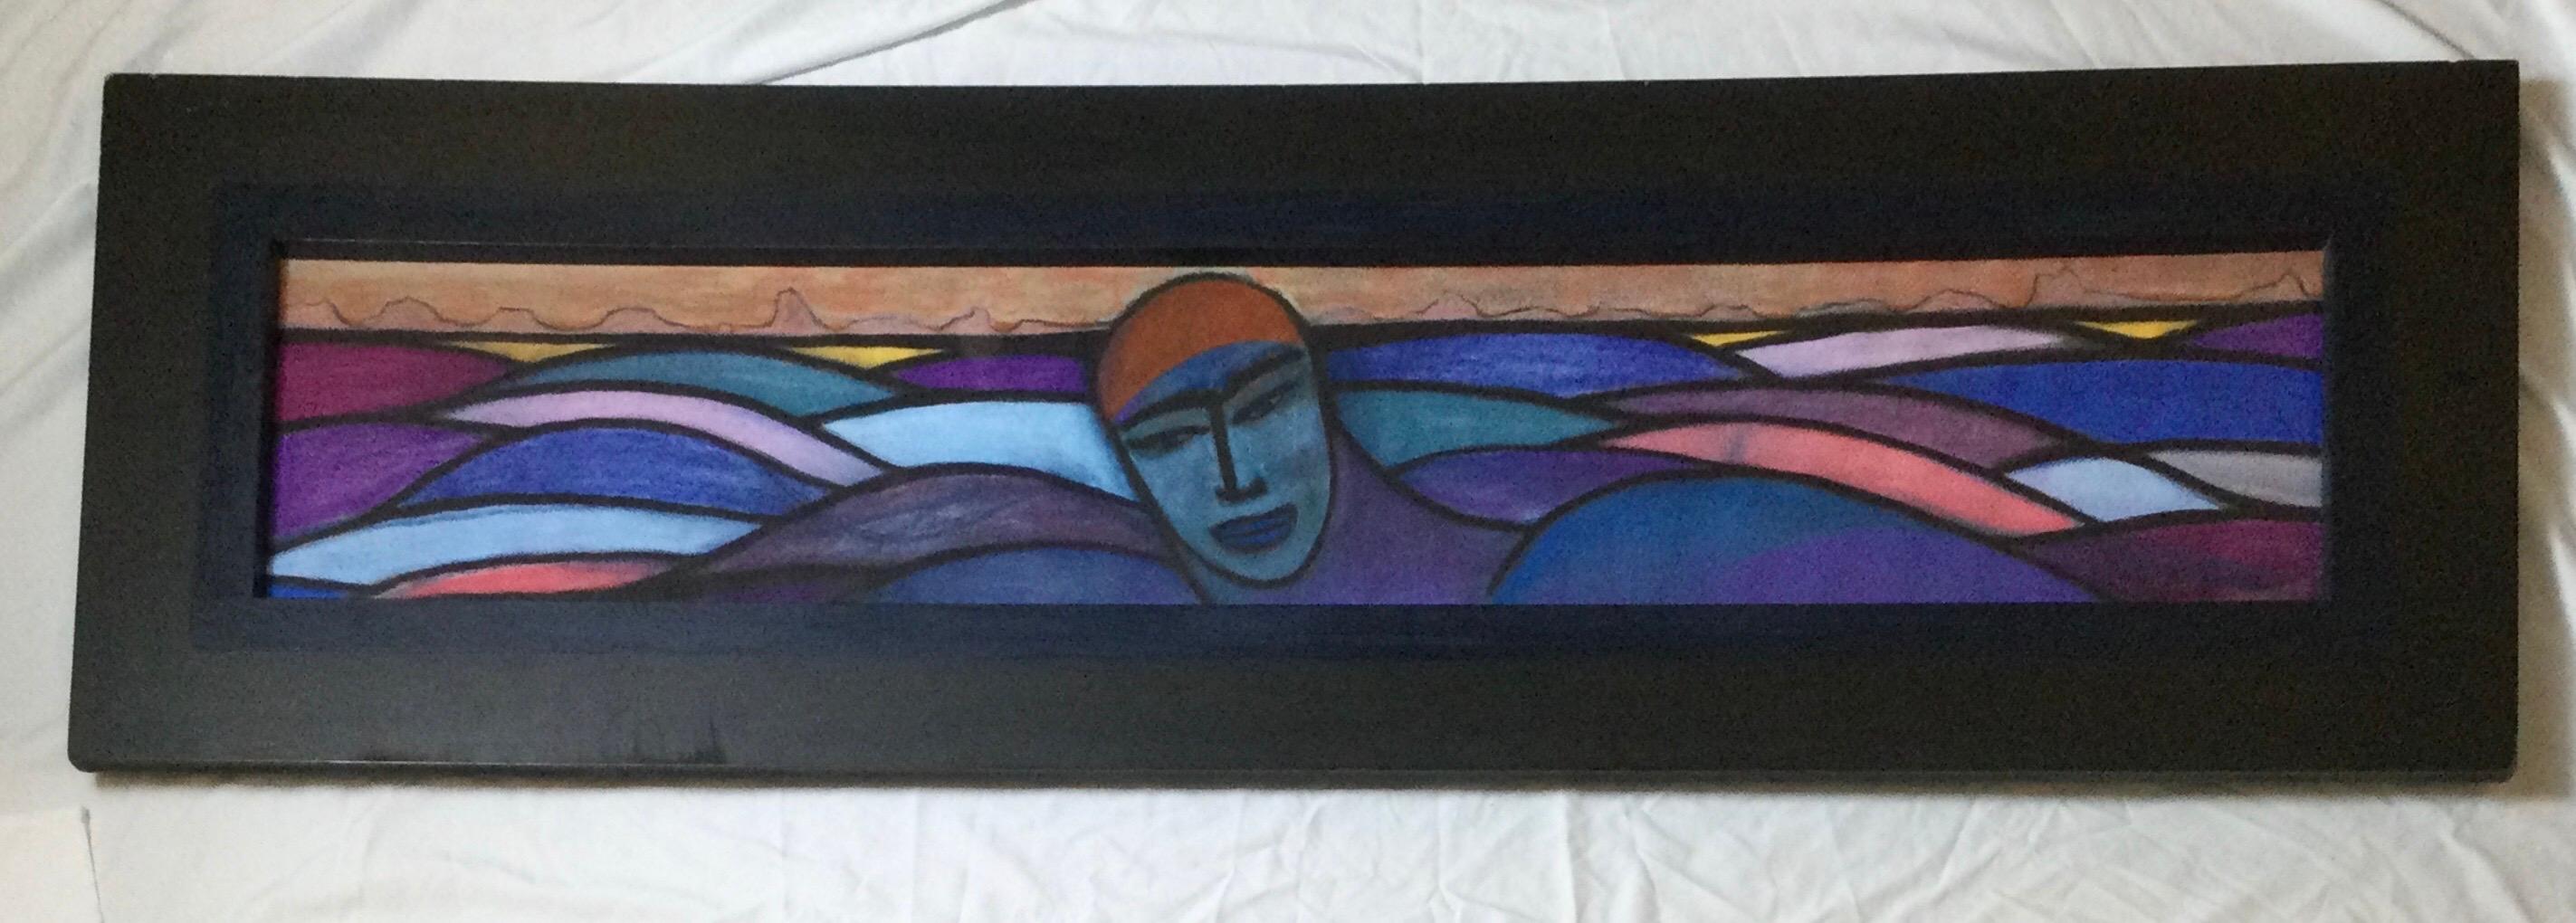 Laurence Setton Pastel signed and dated 1989 The Swimmer. Measures: 20